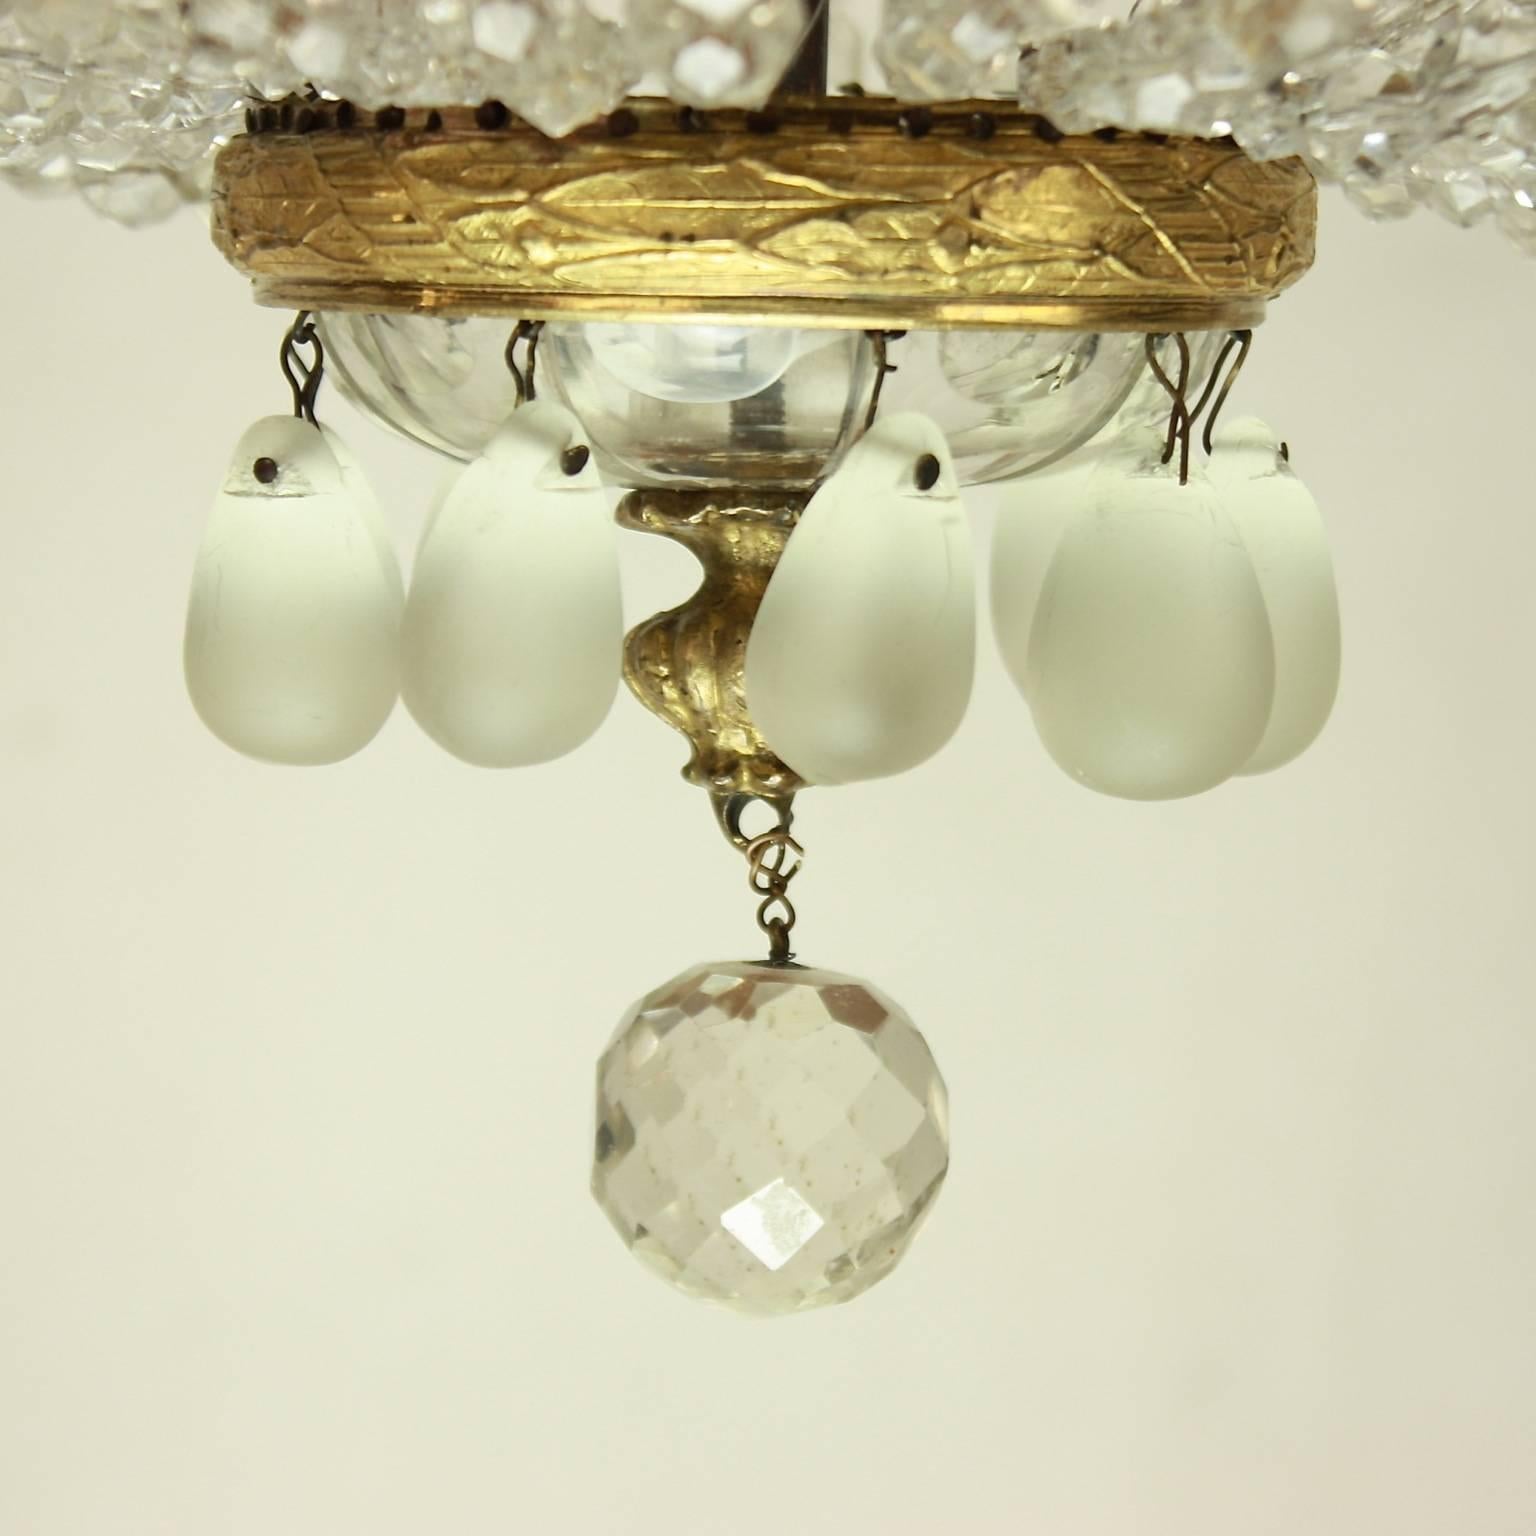 19th Century Fine French Empire Style Cut-Crystal Tent and Bag Chandelier For Sale